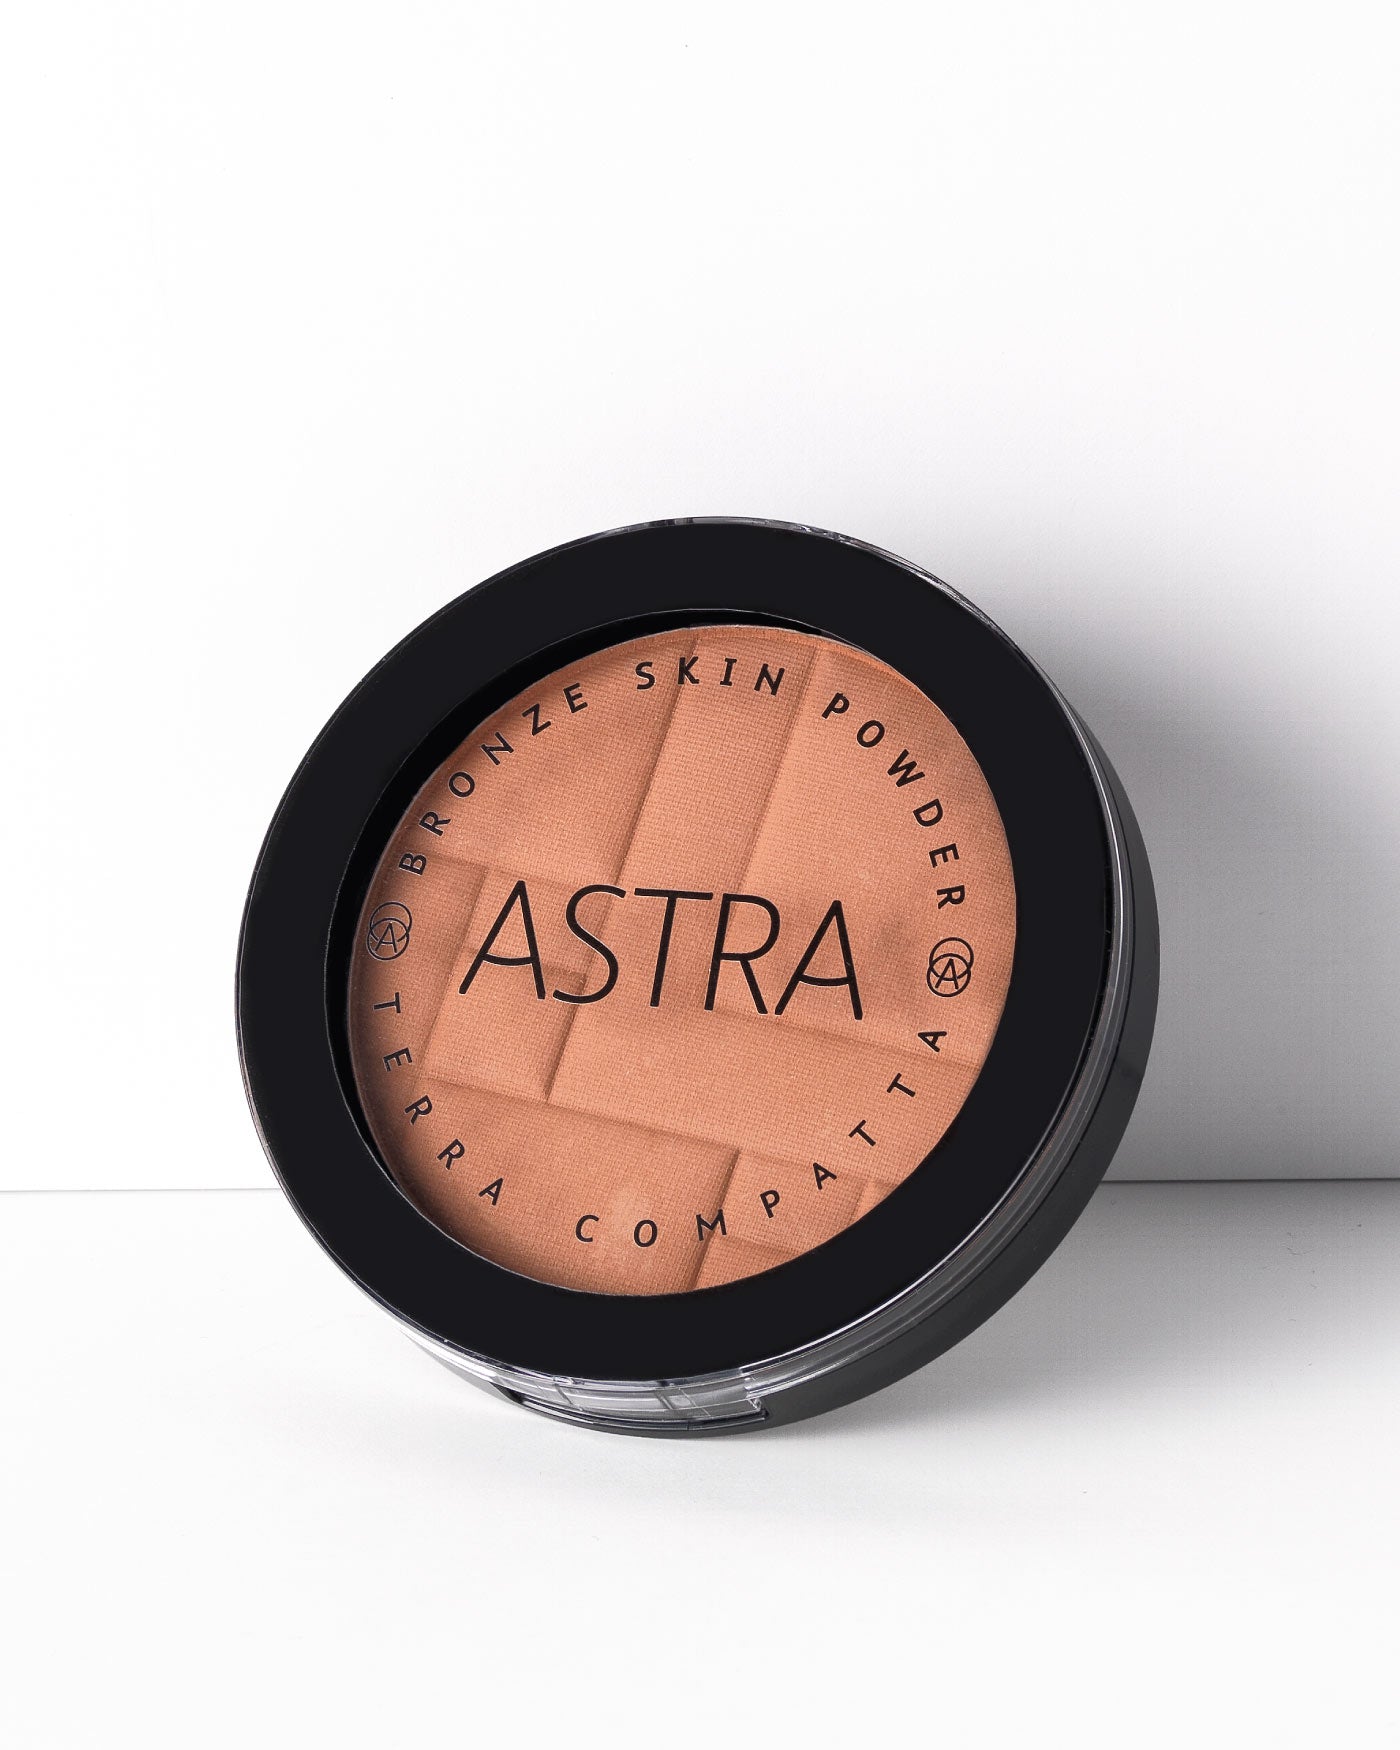 BRONZE SKIN POWDER - All Products - Astra Make-Up